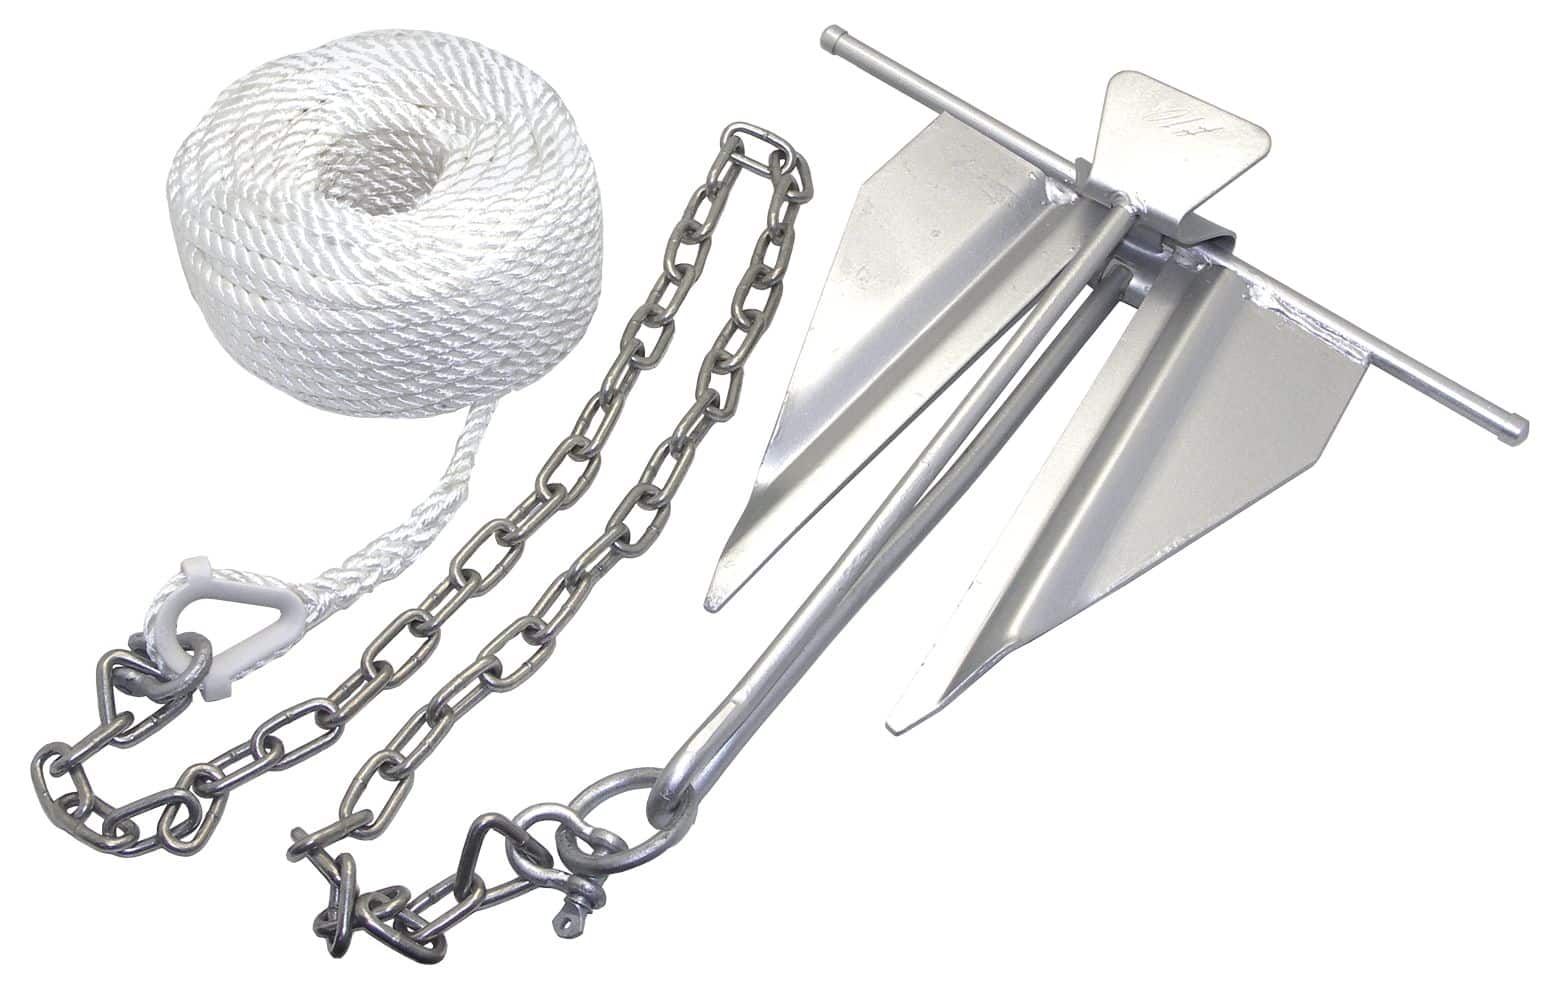 Leopard Galvanized Slip Ring #7 Anchor Kit, Includes Chain & Rope 5-lb